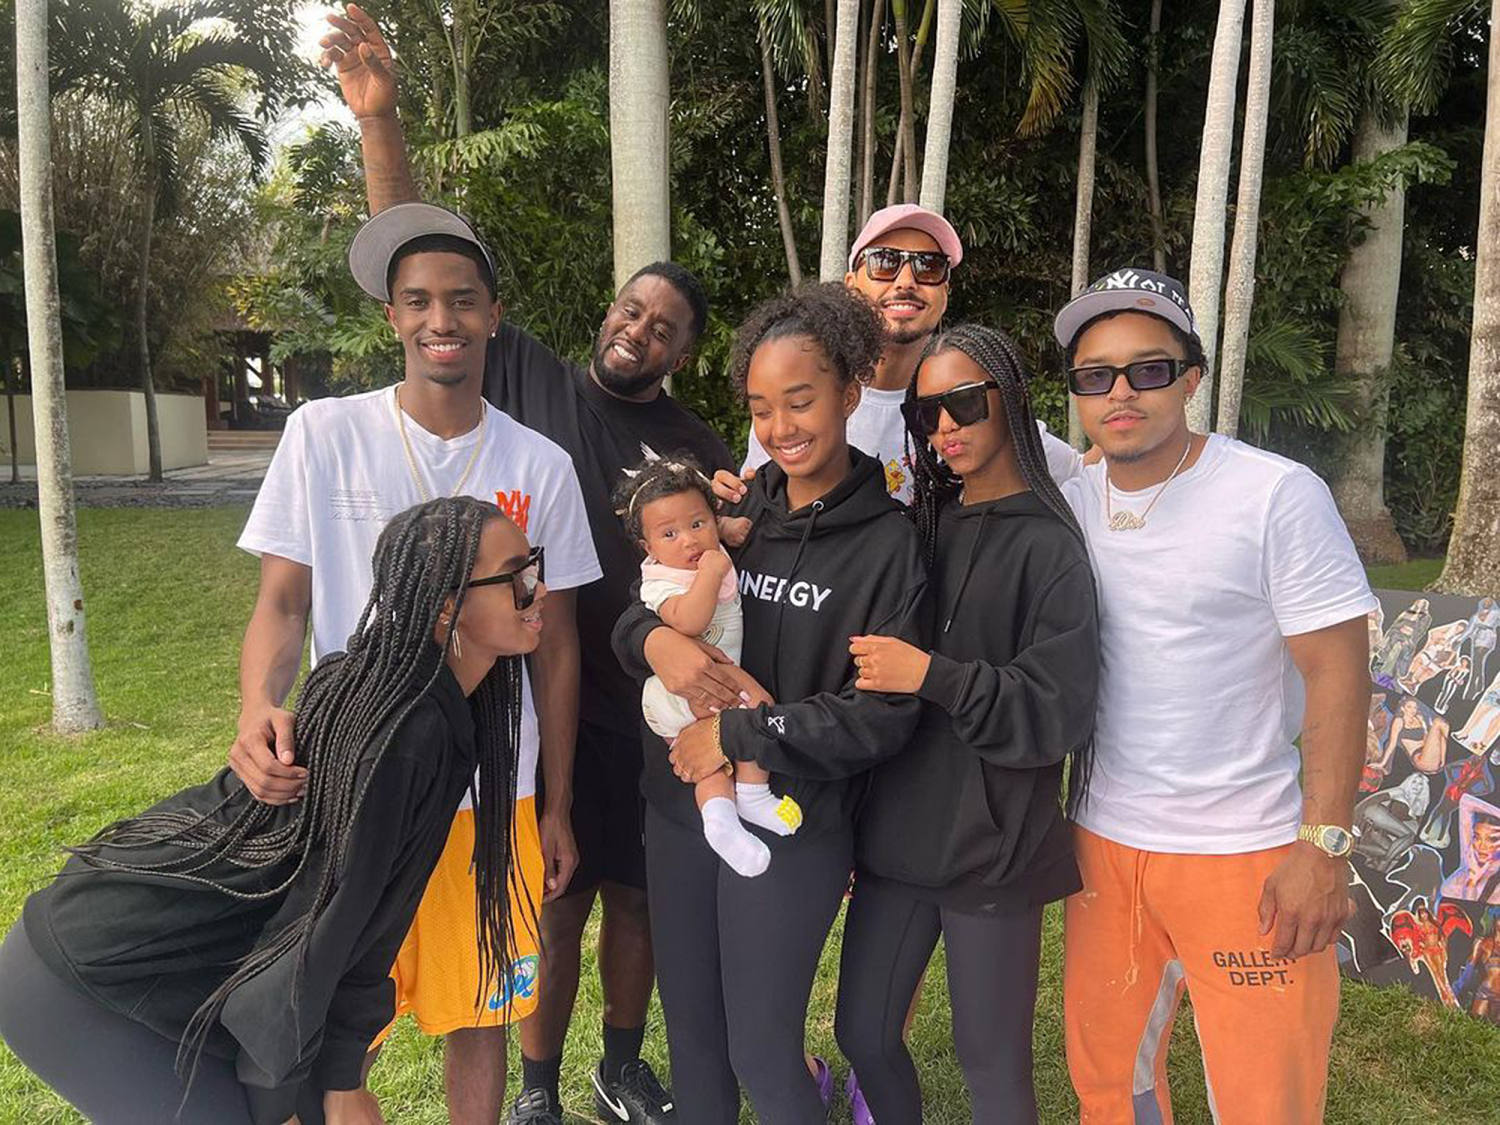 Sean Diddy Combs is a father of 7: All about his family